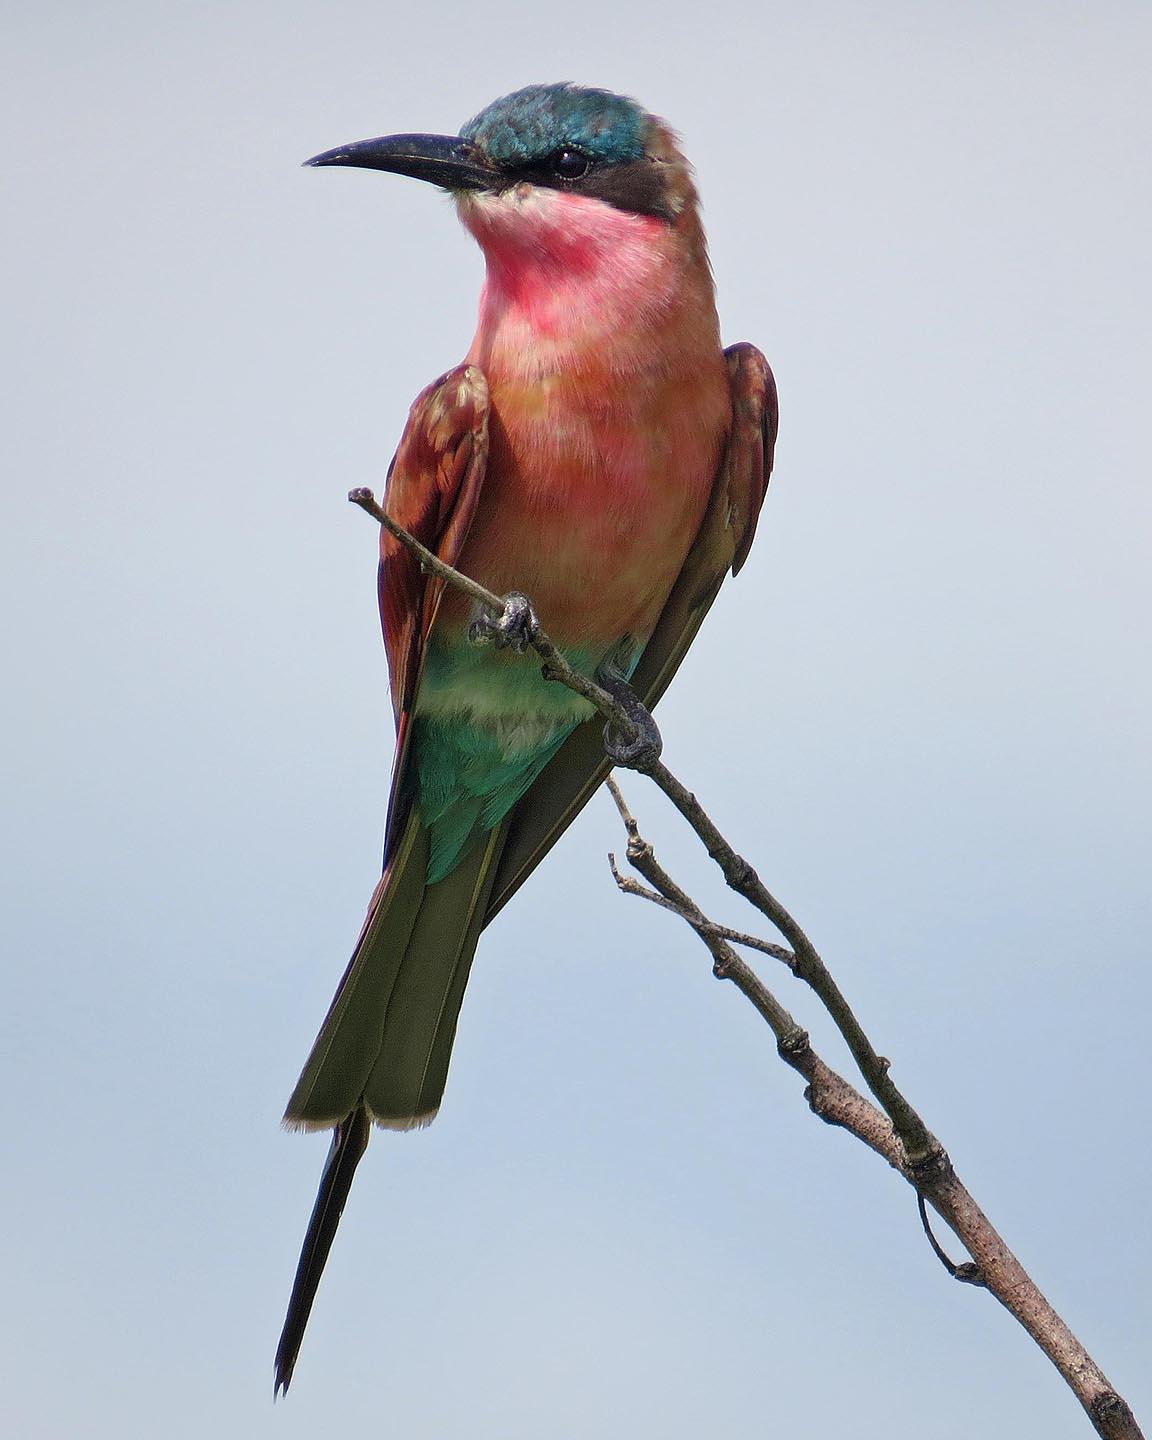 Southern Carmine Bee-eater Photo by Peter Boesman